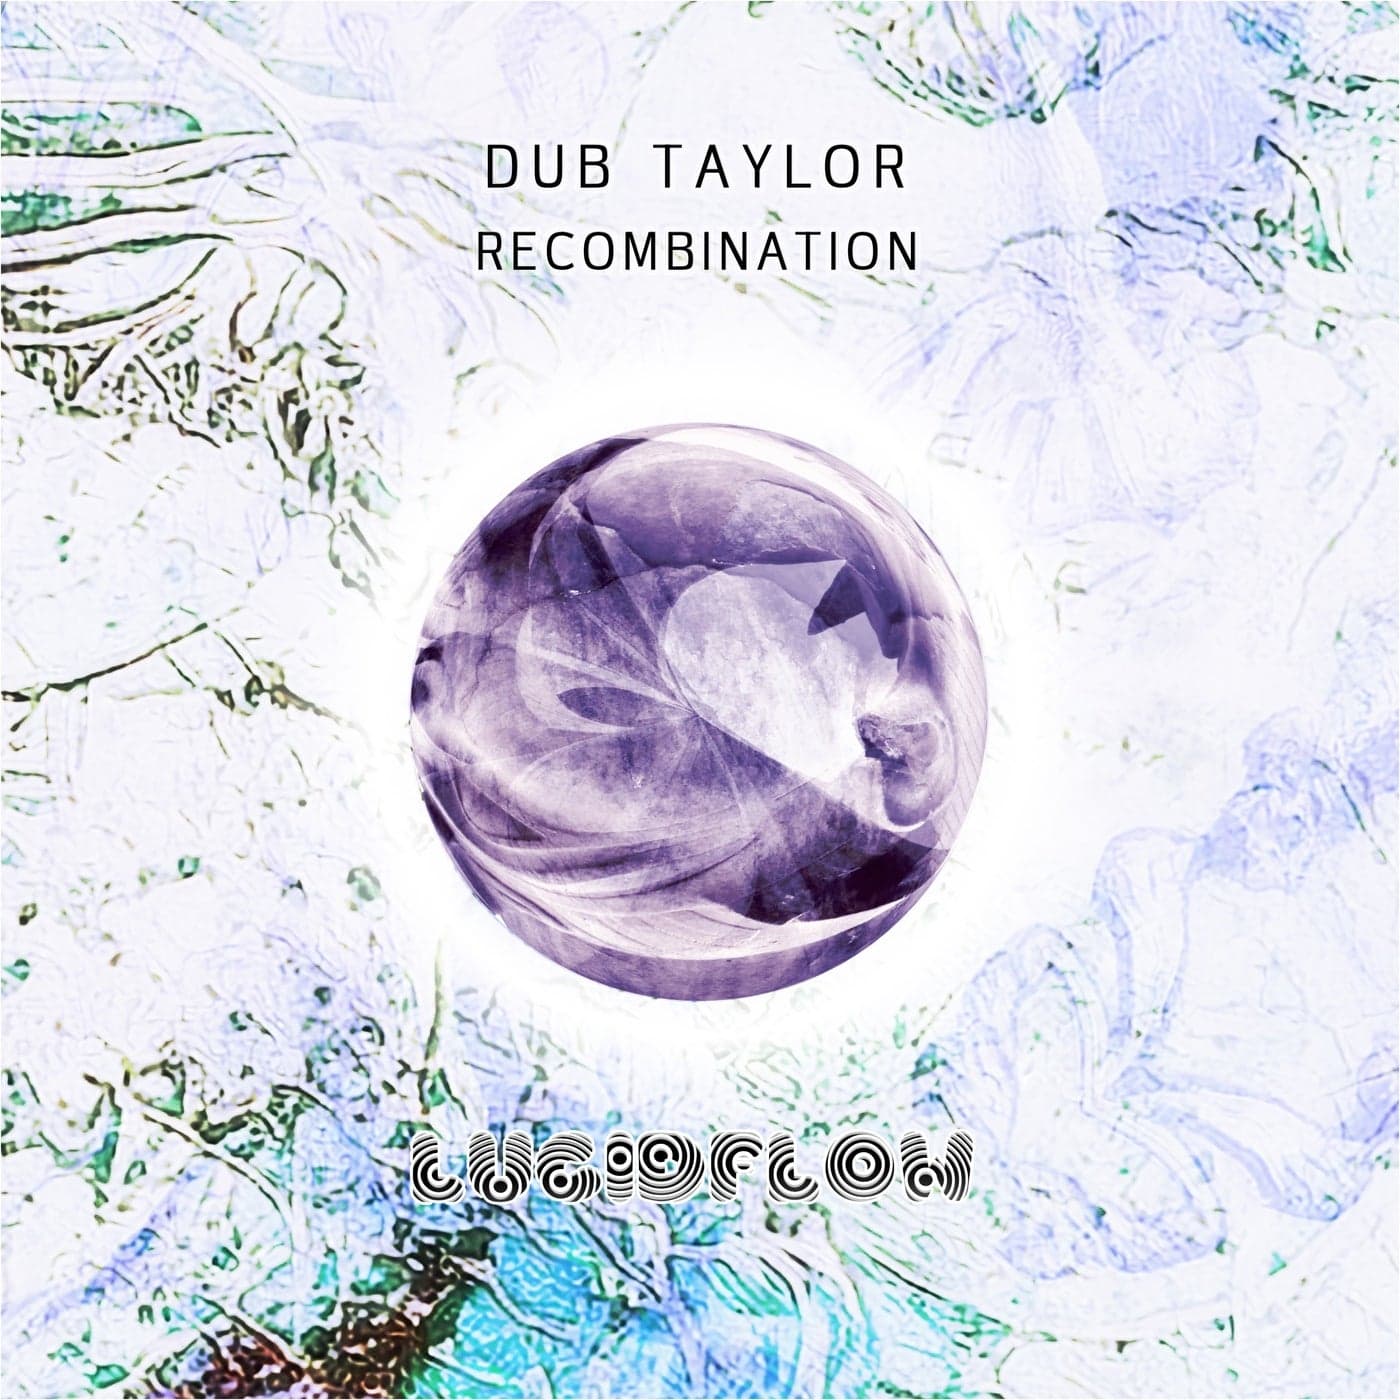 Download Dub Taylor - Recombination on Electrobuzz